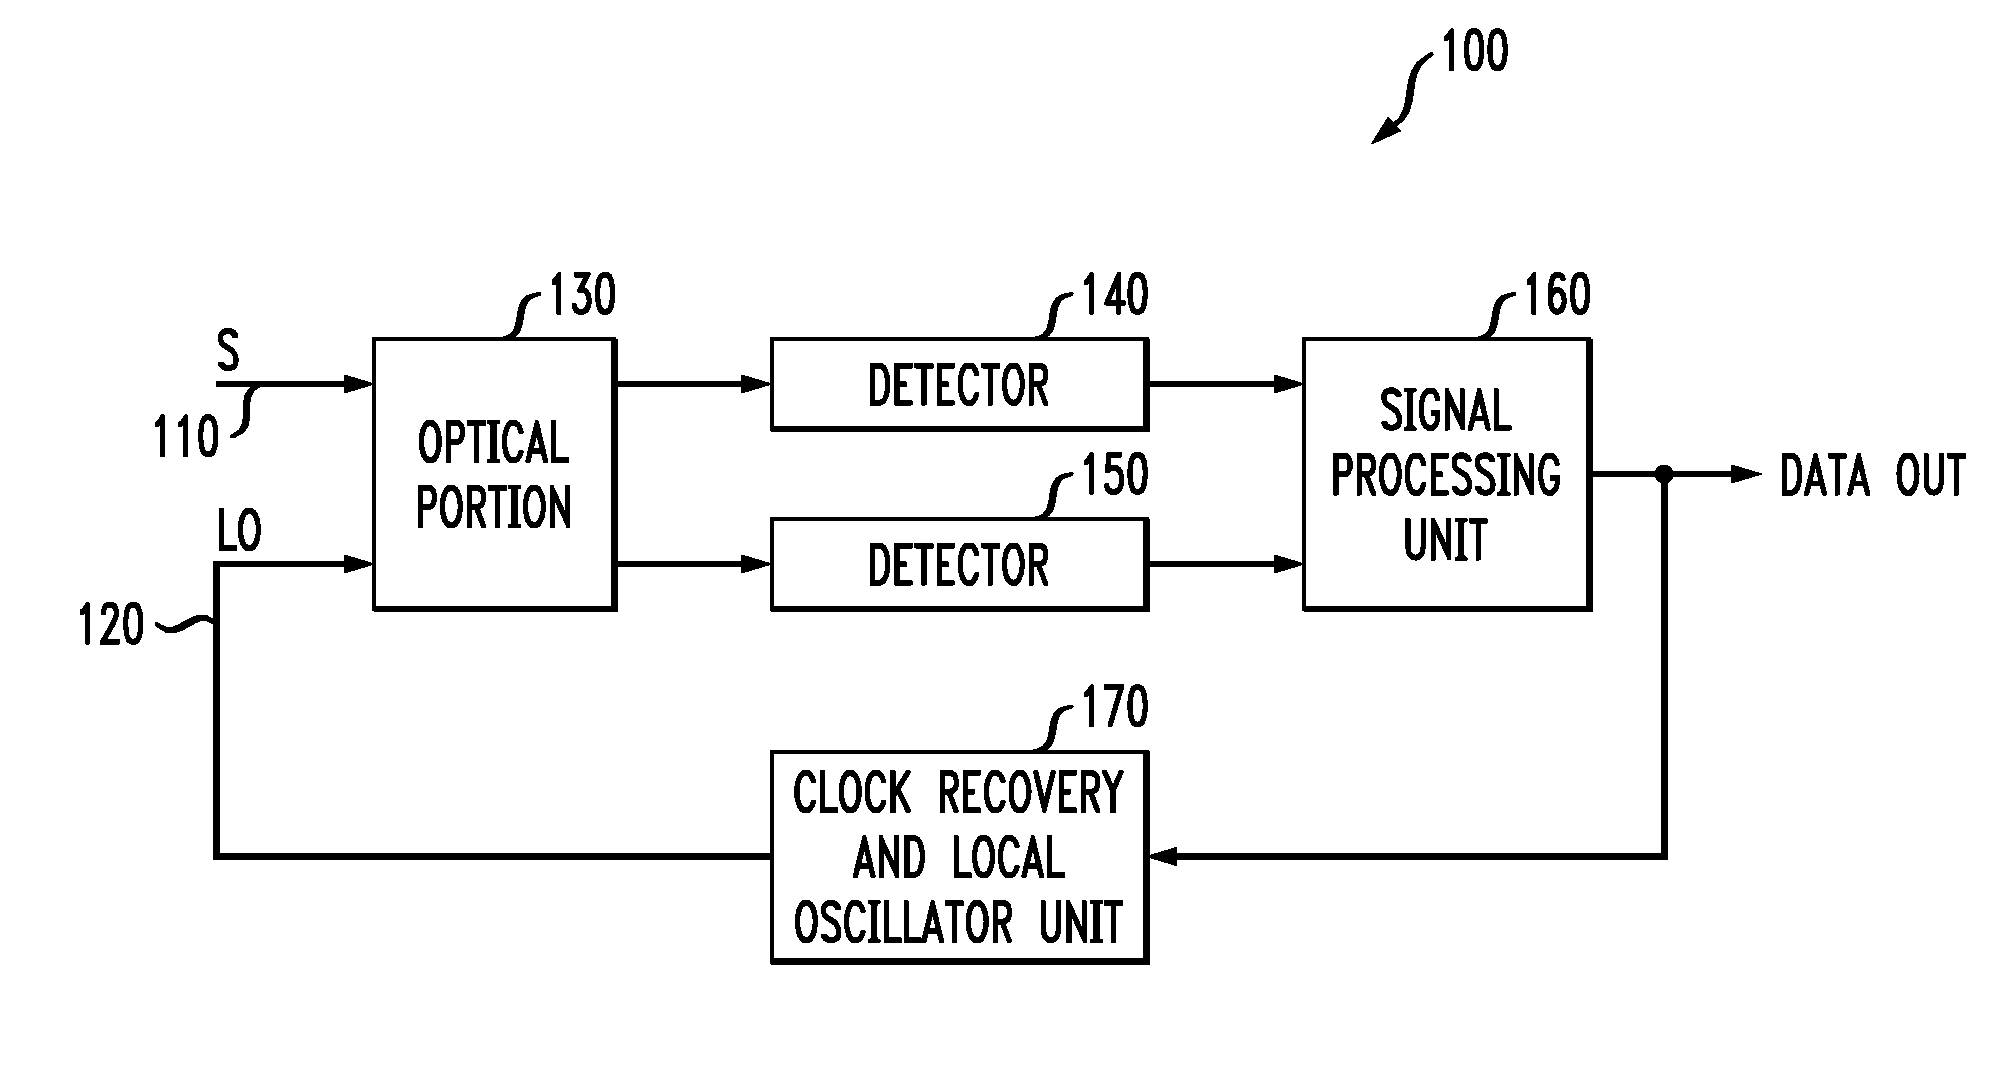 System and method for receiving coherent, polarizaztion-multiplexed optical signals